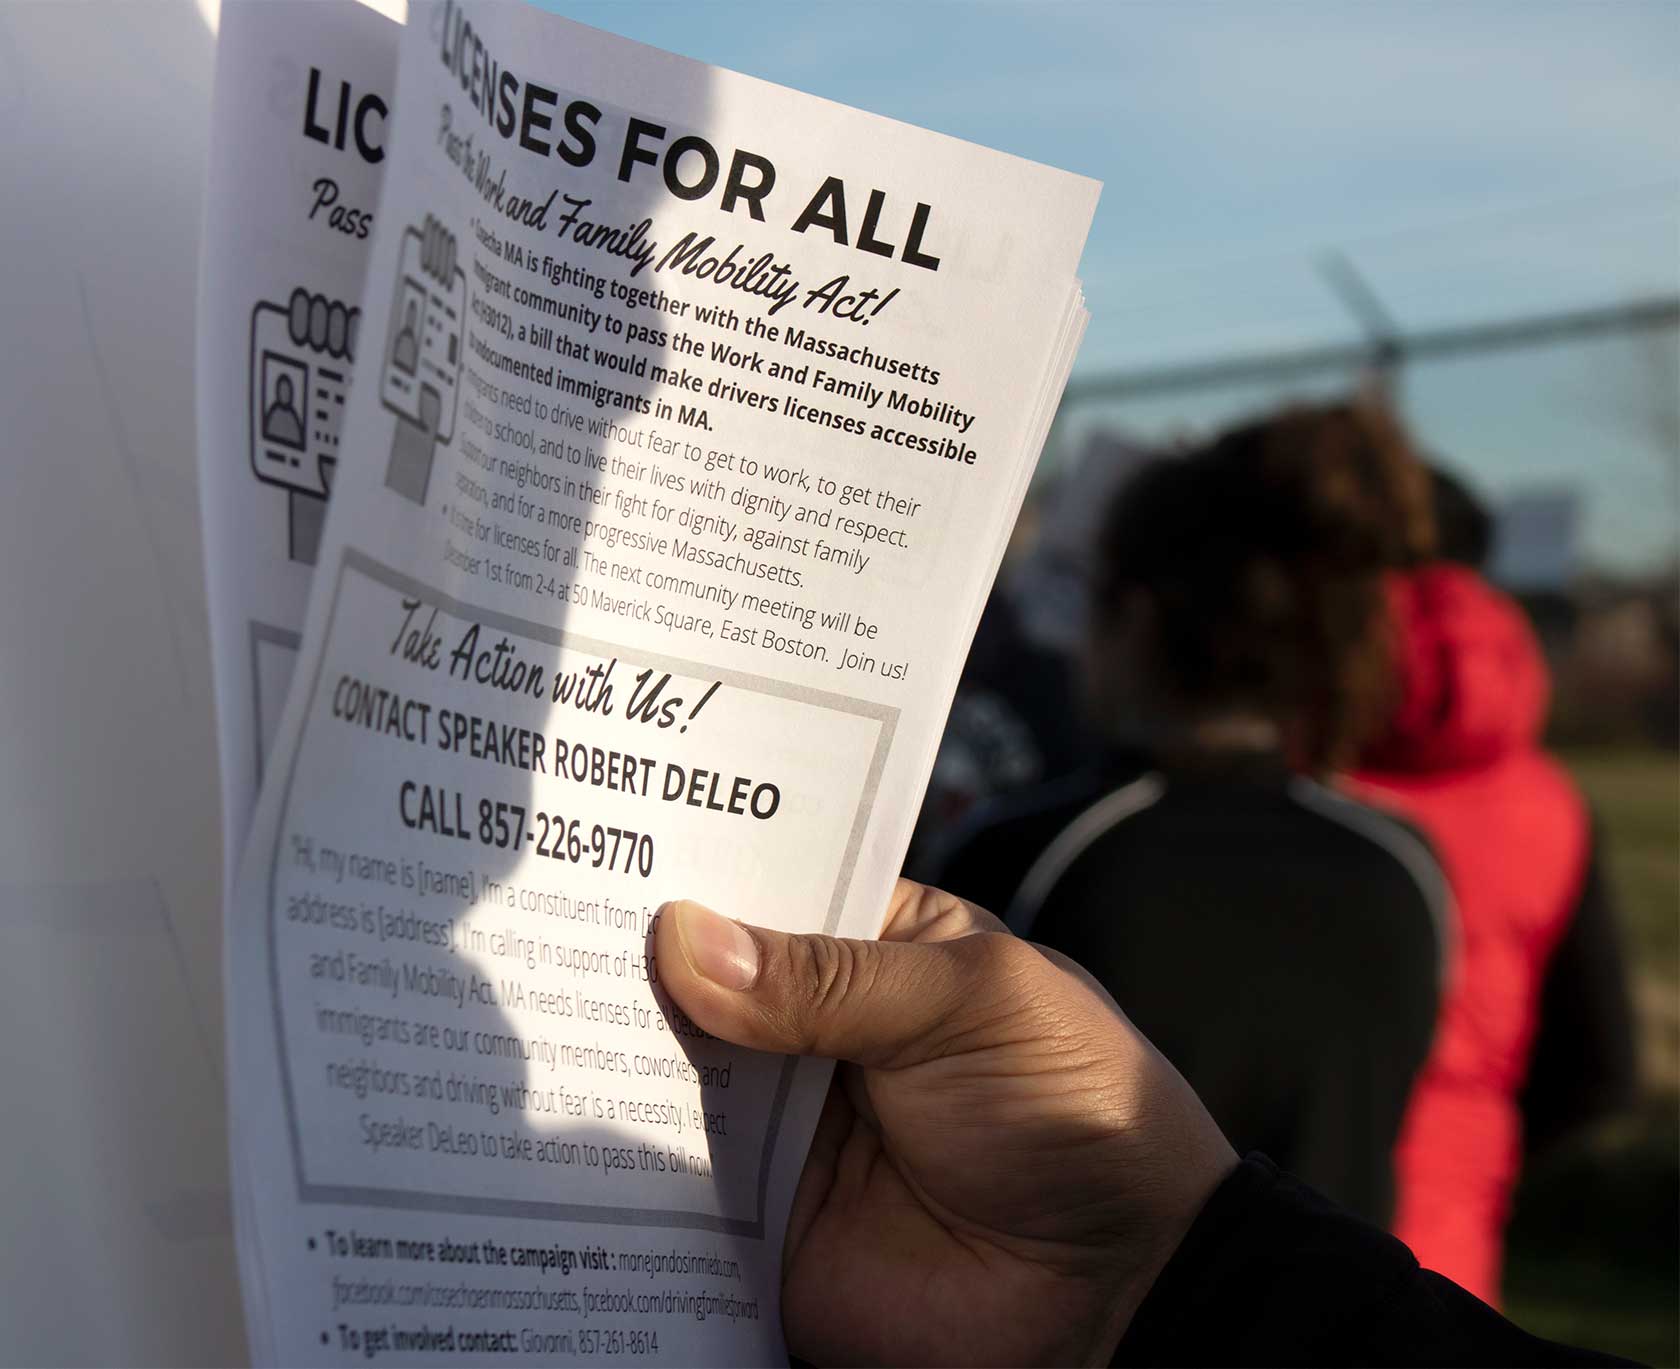 Getting a driver's license in Mass. as an undocumented person? What to know.